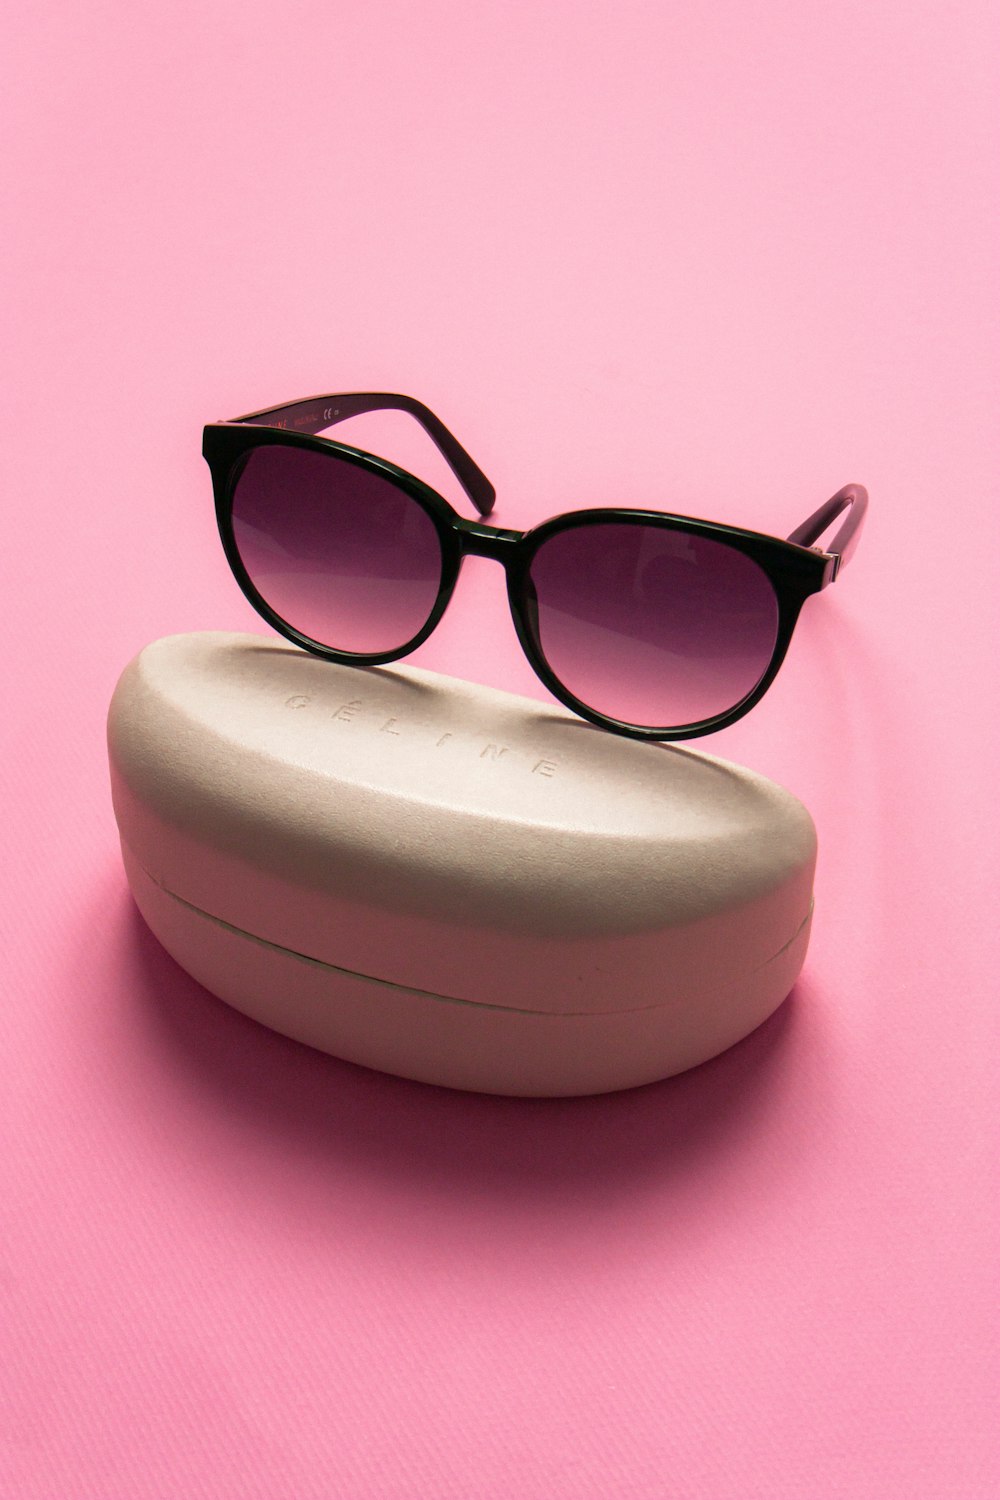 a pair of sunglasses on a white bowl